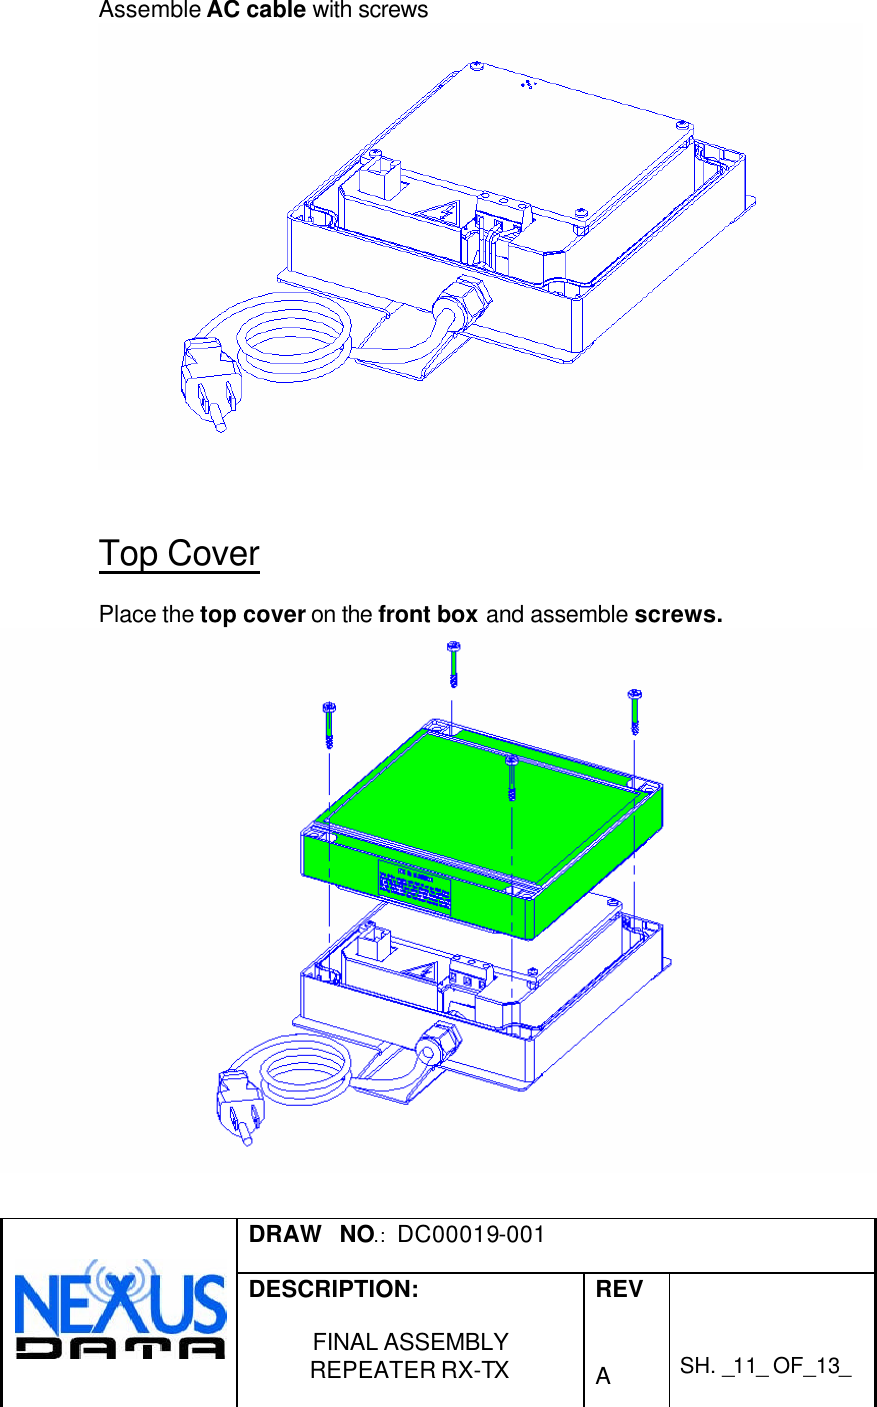  DRAW   NO.:  DC00019-001   DESCRIPTION:  FINAL ASSEMBLY REPEATER RX-TX  REV   A    SH. _11_ OF_13_   Assemble AC cable with screws    Top Cover  Place the top cover on the front box and assemble screws.   